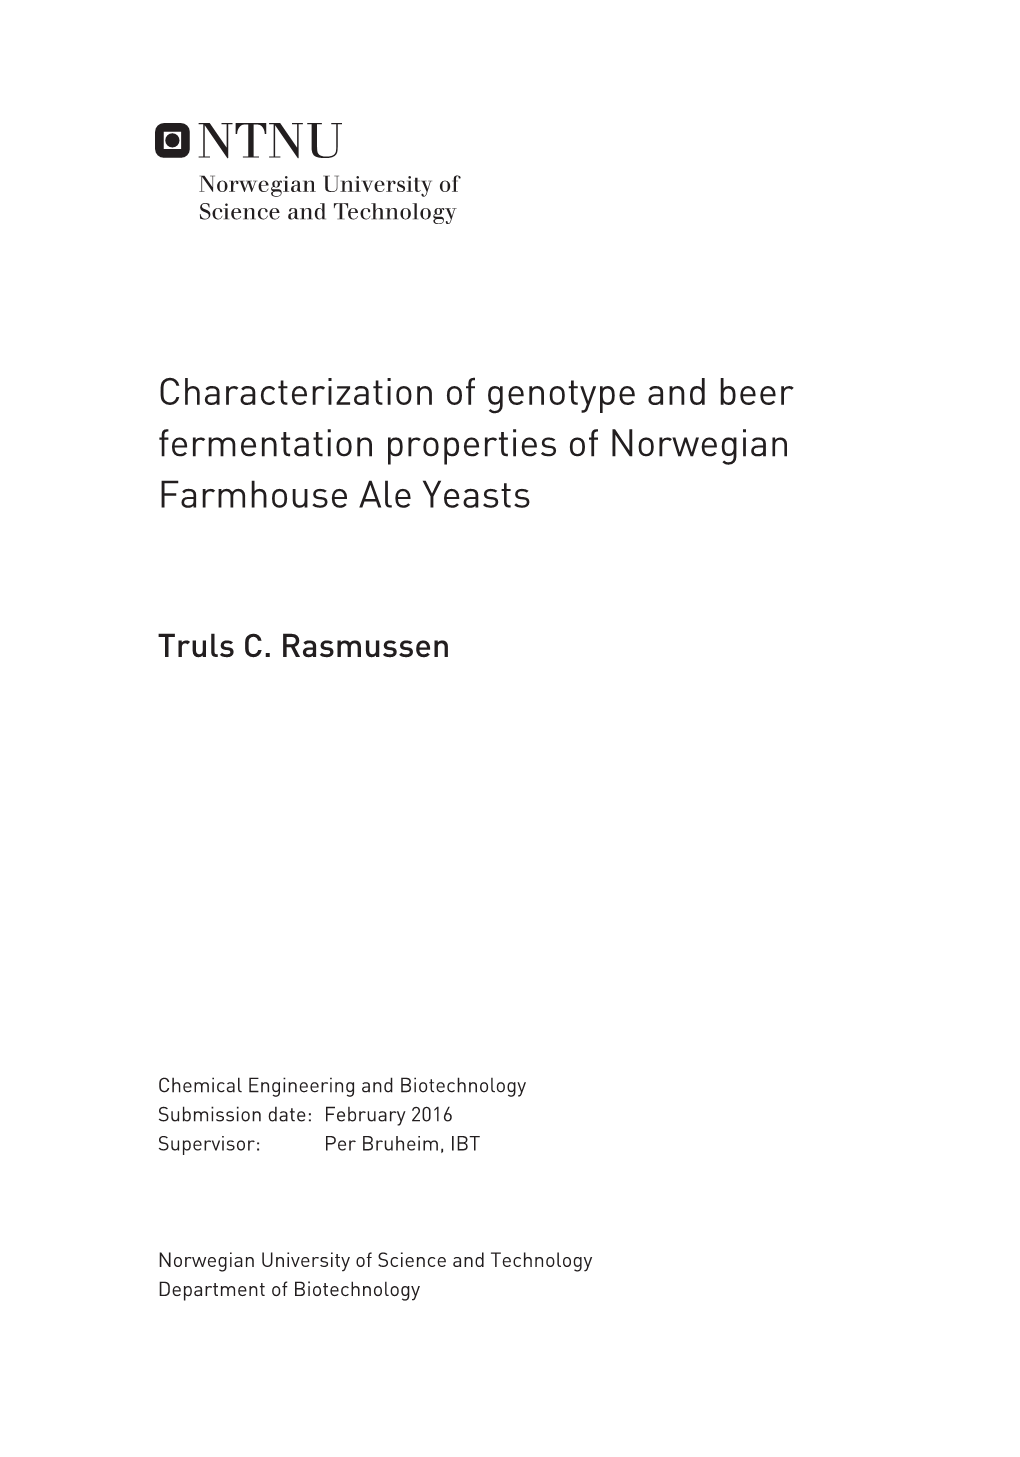 Characterization of Genotype and Beer Fermentation Properties of Norwegian Farmhouse Ale Yeasts